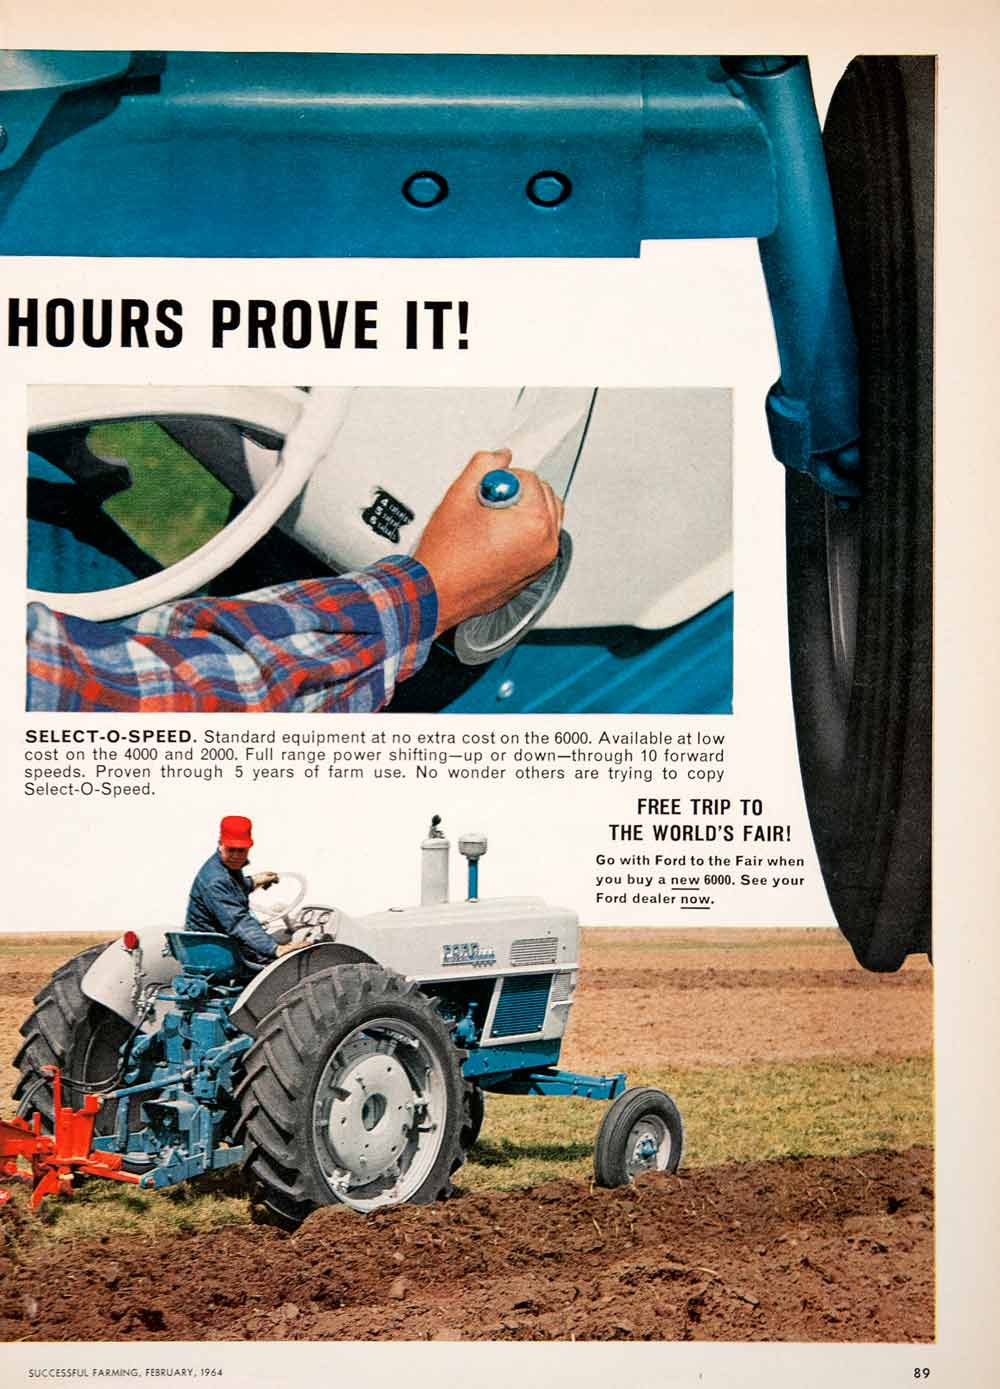 1964 Ad Ford Tractor Farming Vehicle Plow Agriculture 6000 Select-O-Speed SF4